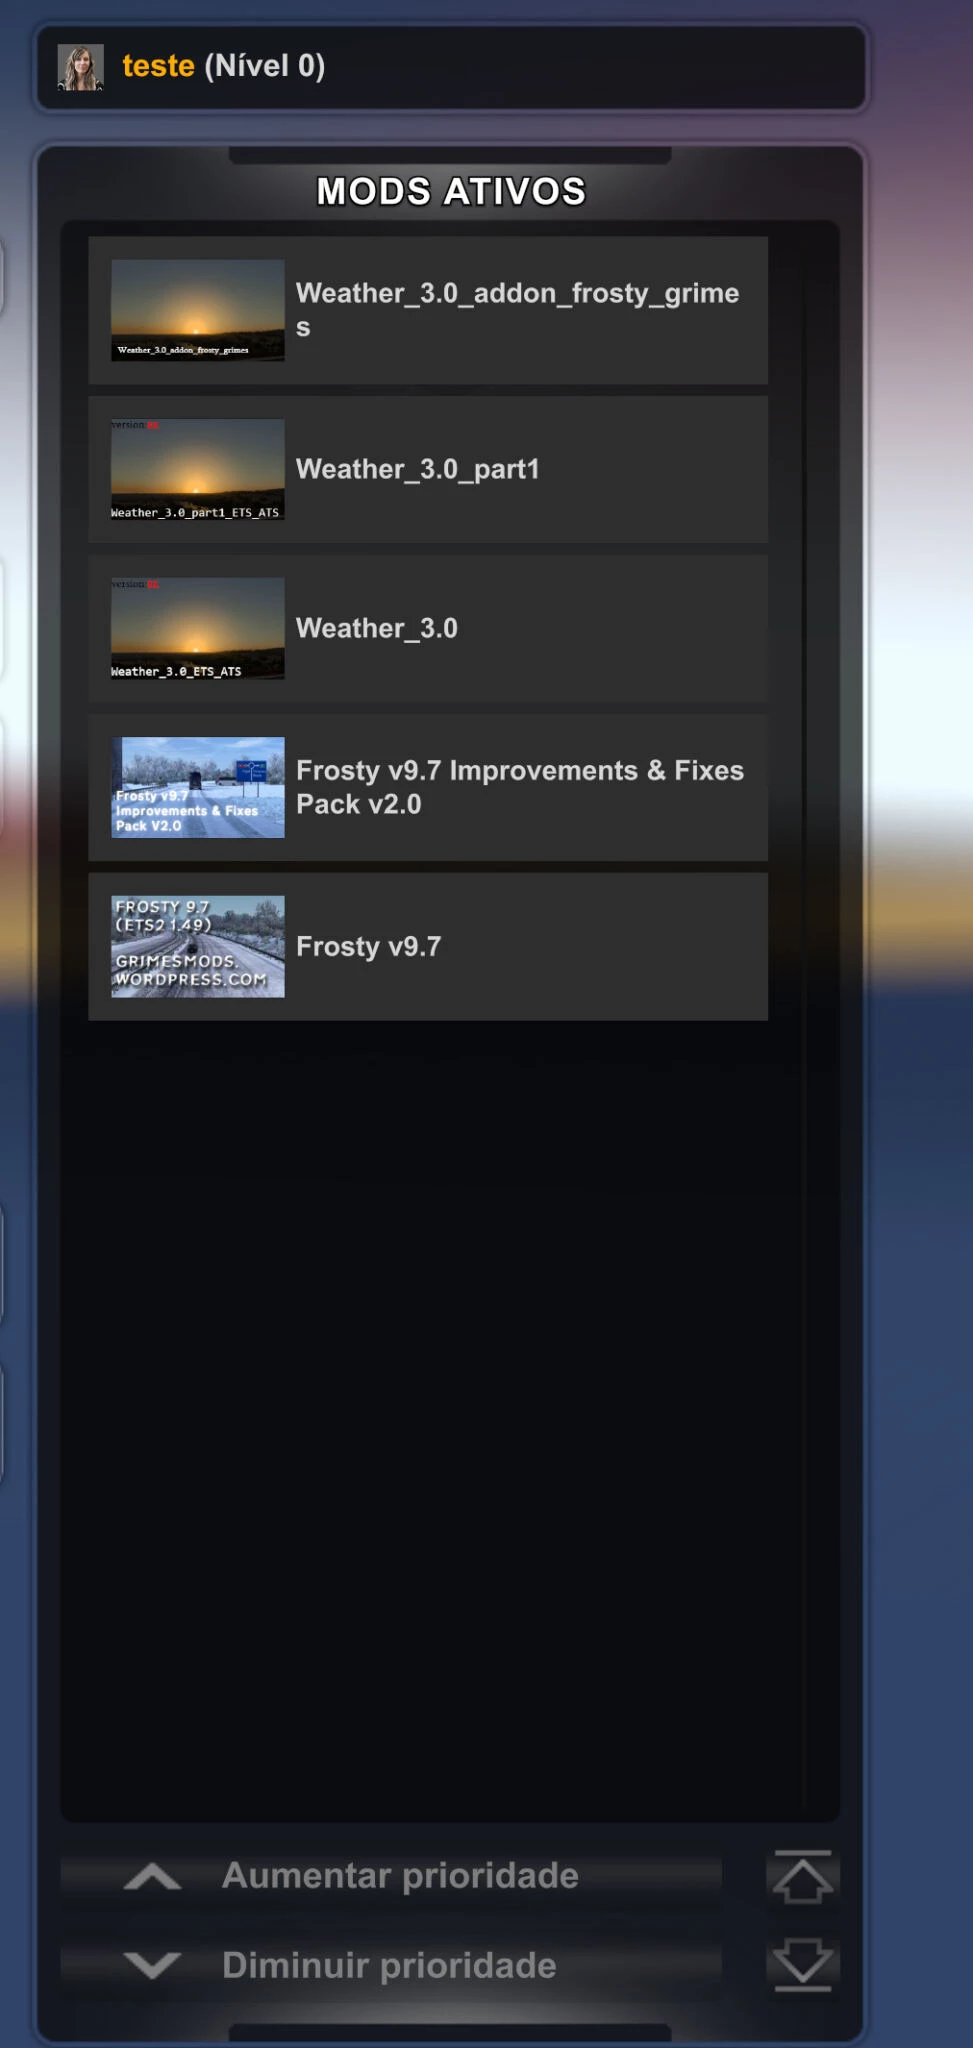 Weather 3.0 addons frosty grimes ETS2 ATS 1.49